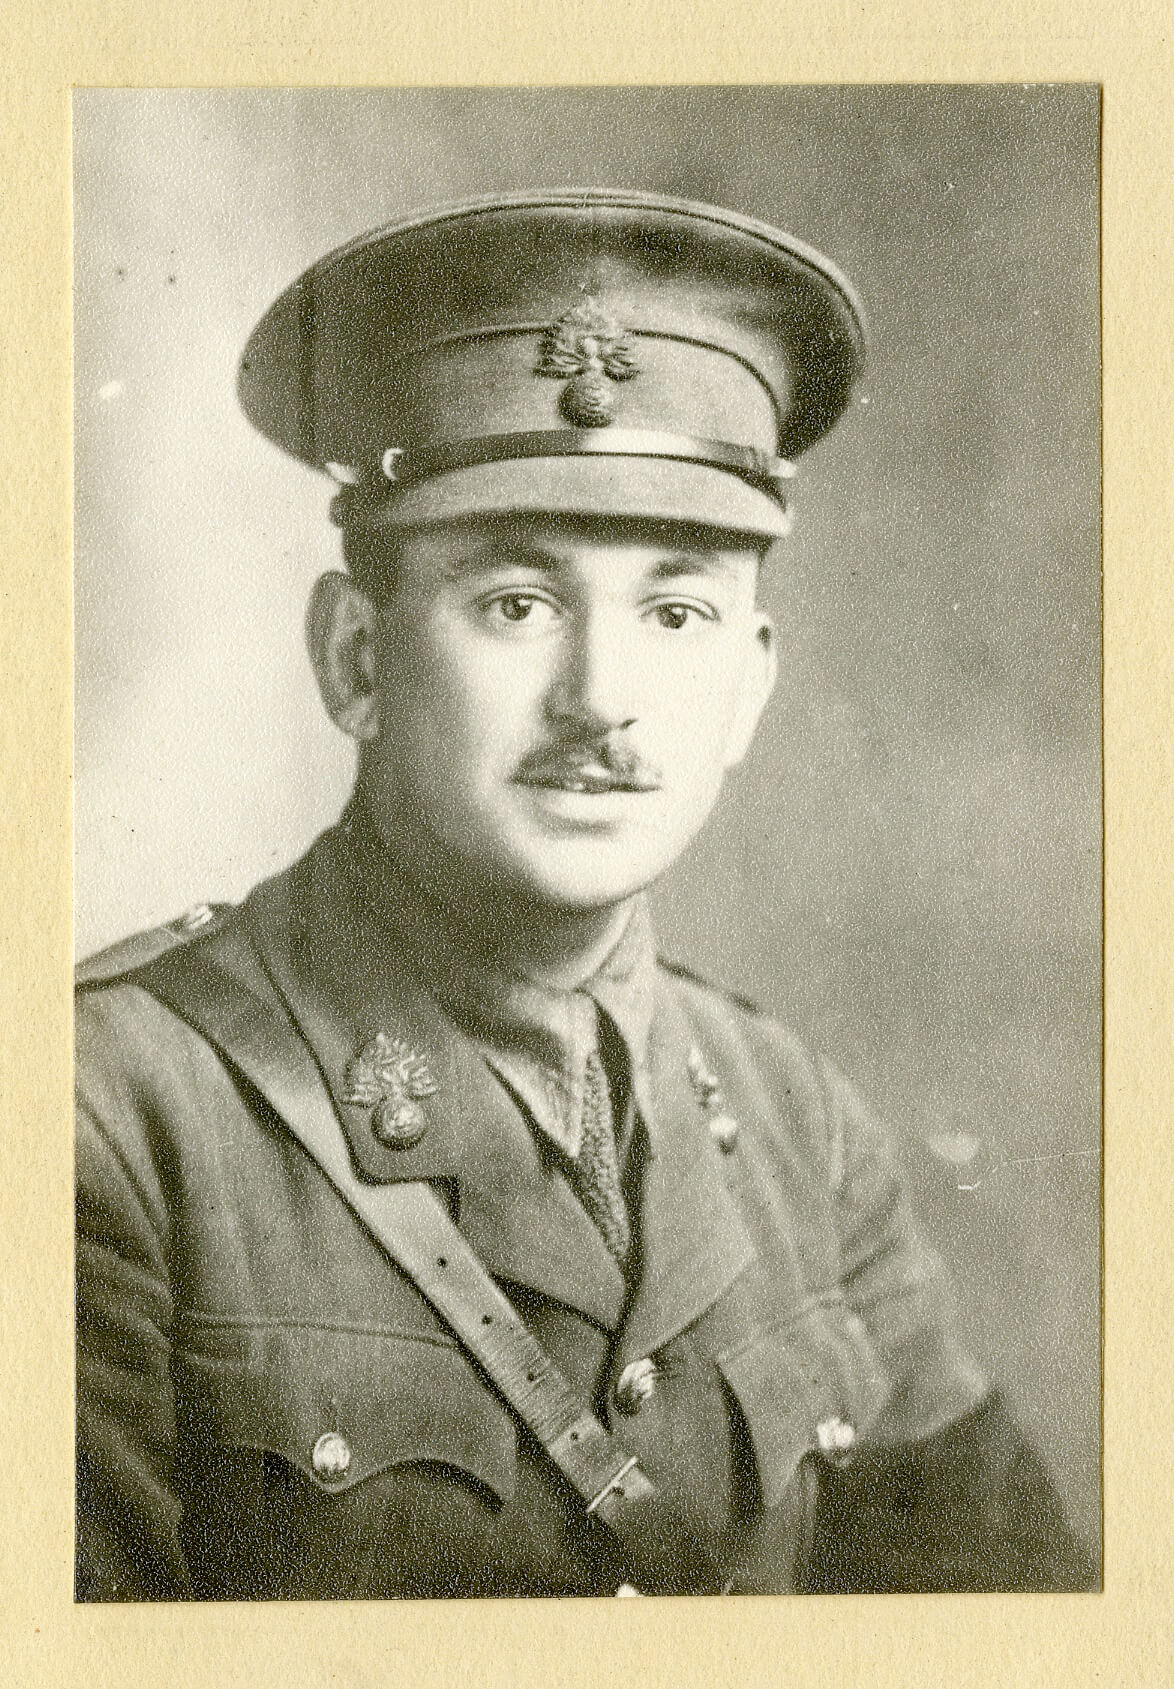 Image shows Philips in his military uniform